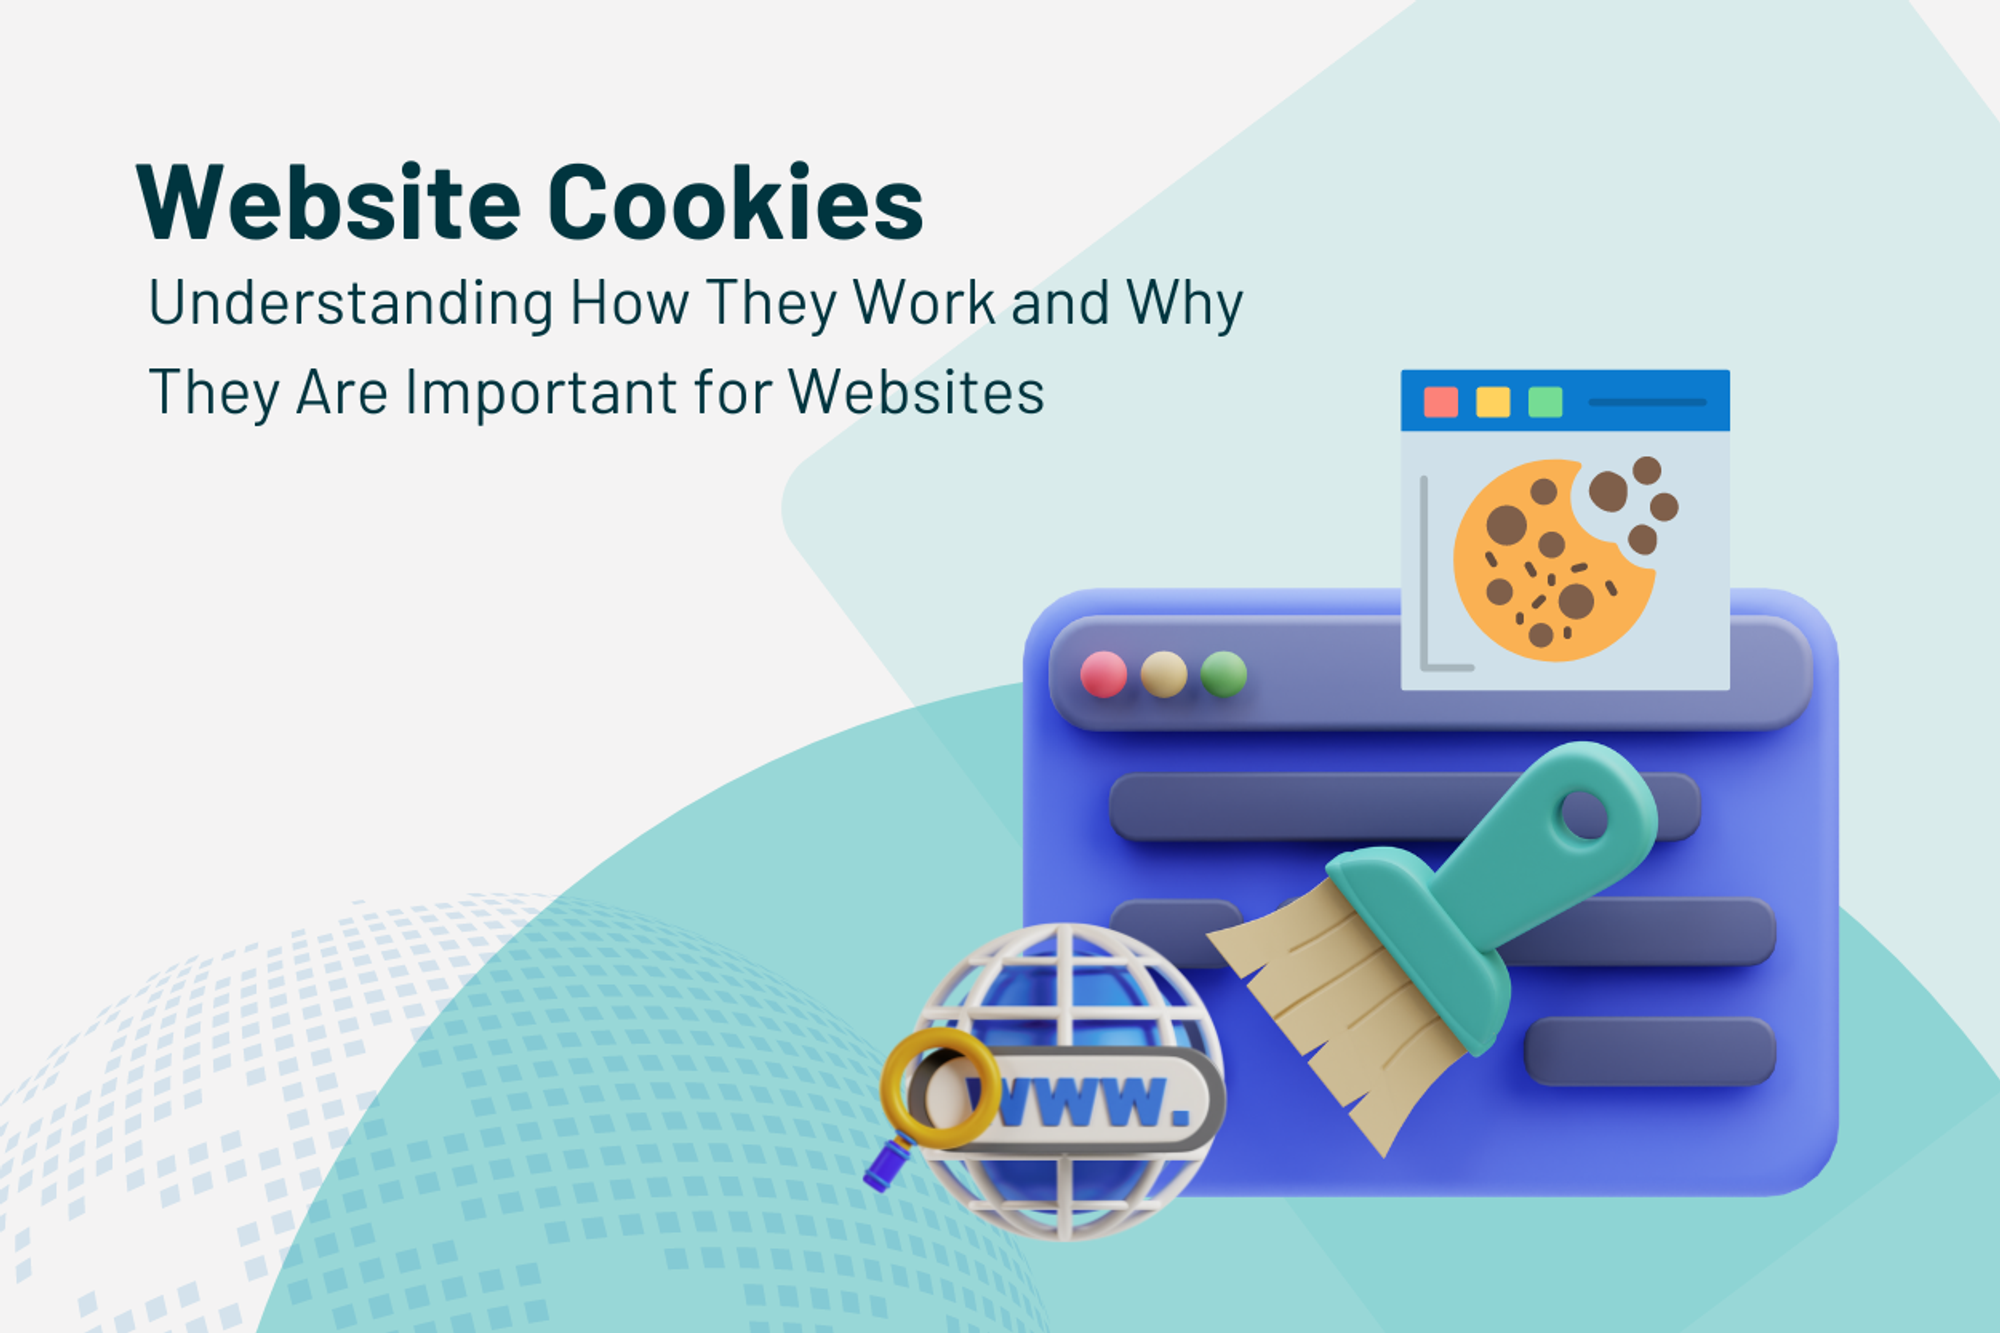 Website Cookies: Understanding How They Work and Why They Are Important for Websites